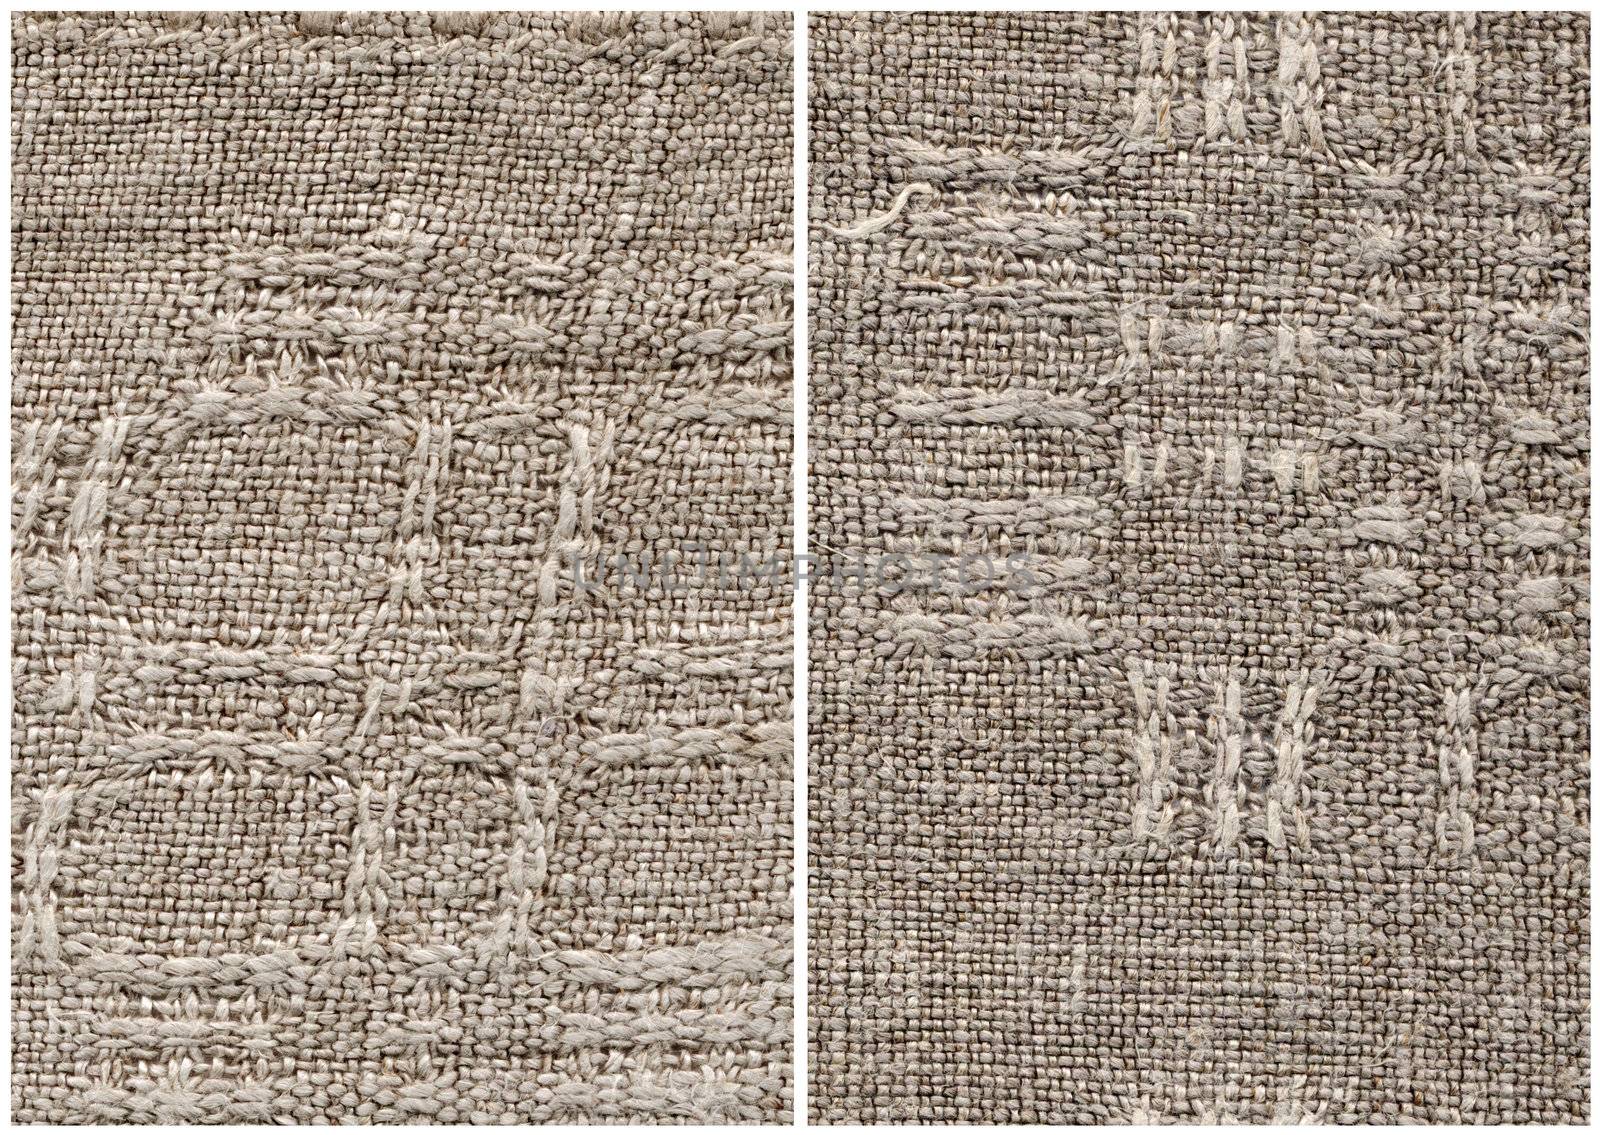 Texture old fabric, fragment of a homespun rural linen cloth on a dining table, handmade, 40 years of 20 centuries. Front and back side